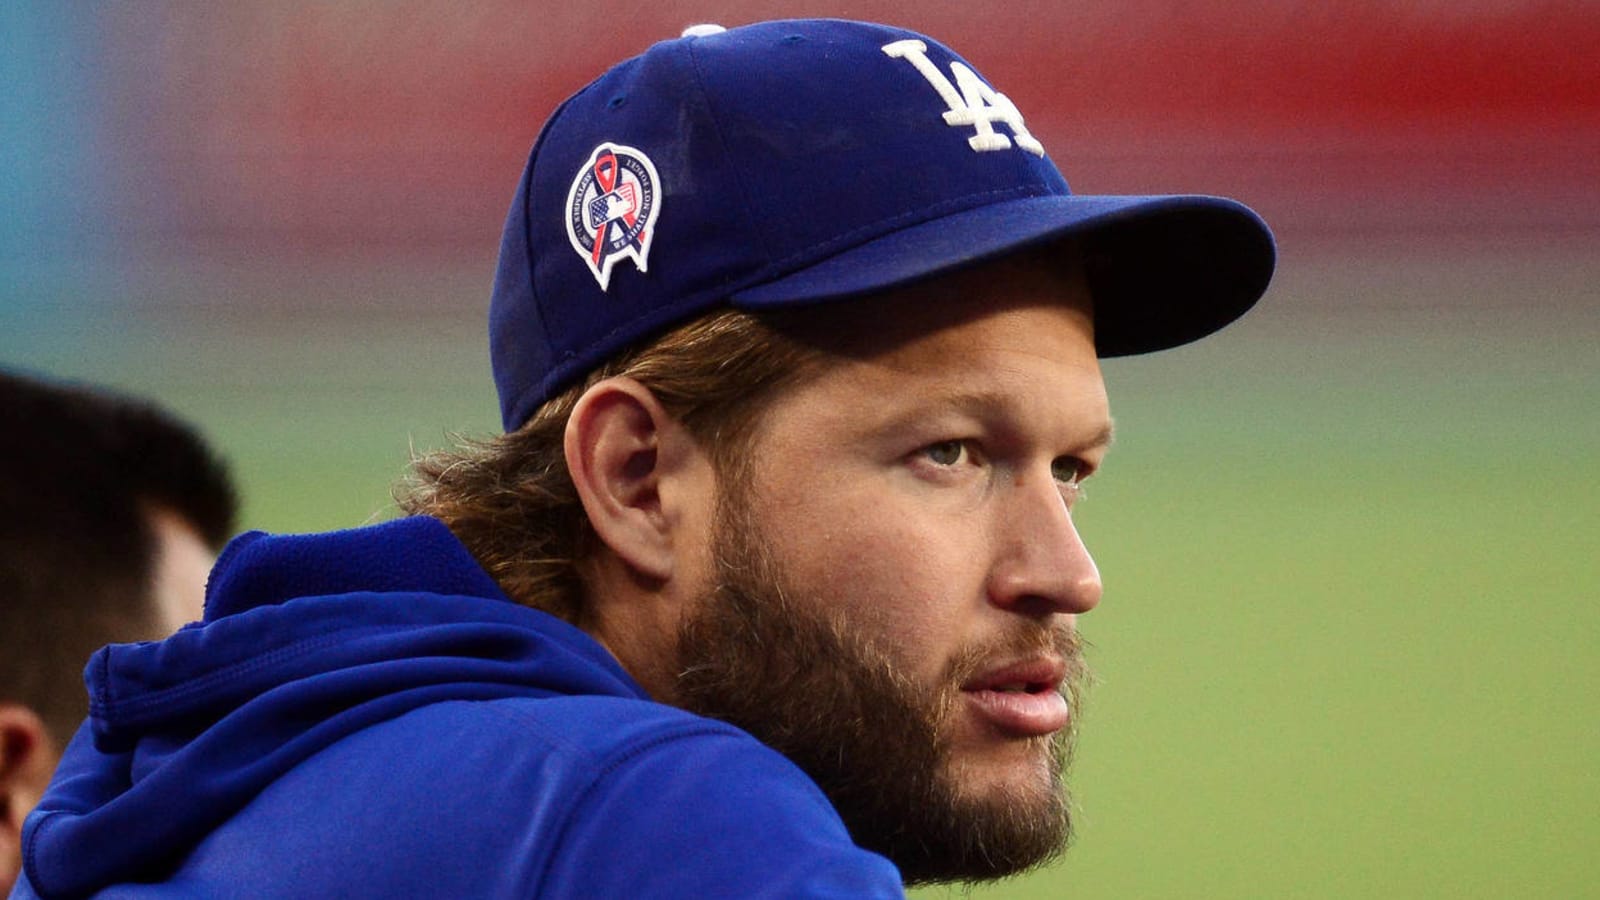 Dodgers 'not too optimistic' about Kershaw's availability